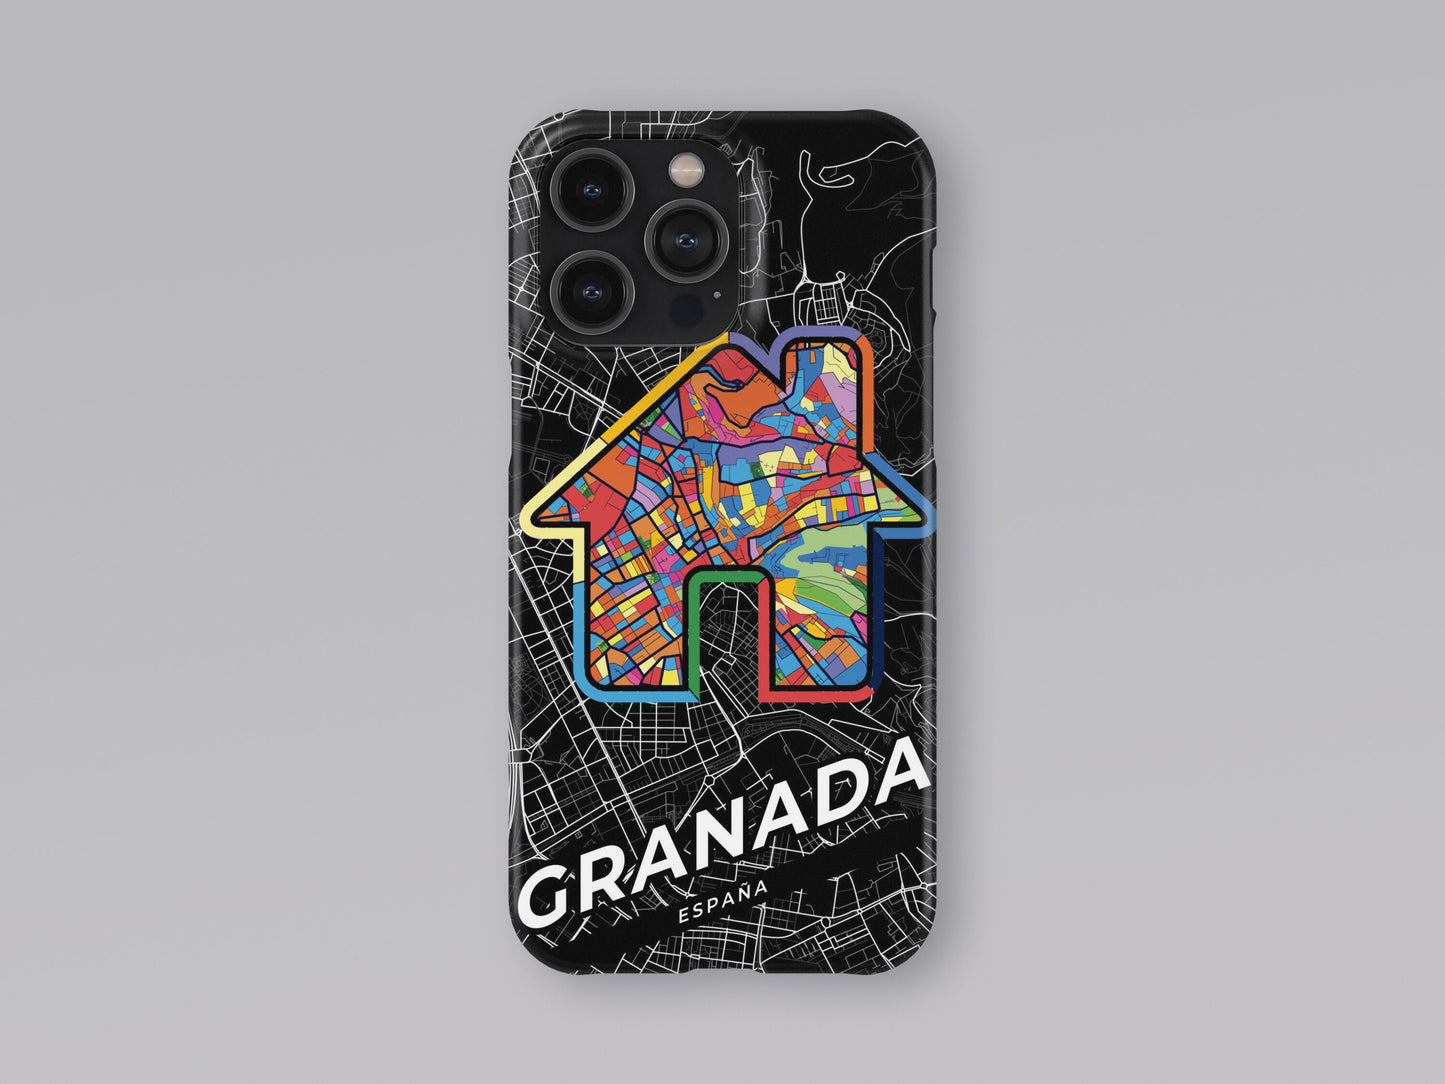 Granada Spain slim phone case with colorful icon. Birthday, wedding or housewarming gift. Couple match cases. 3